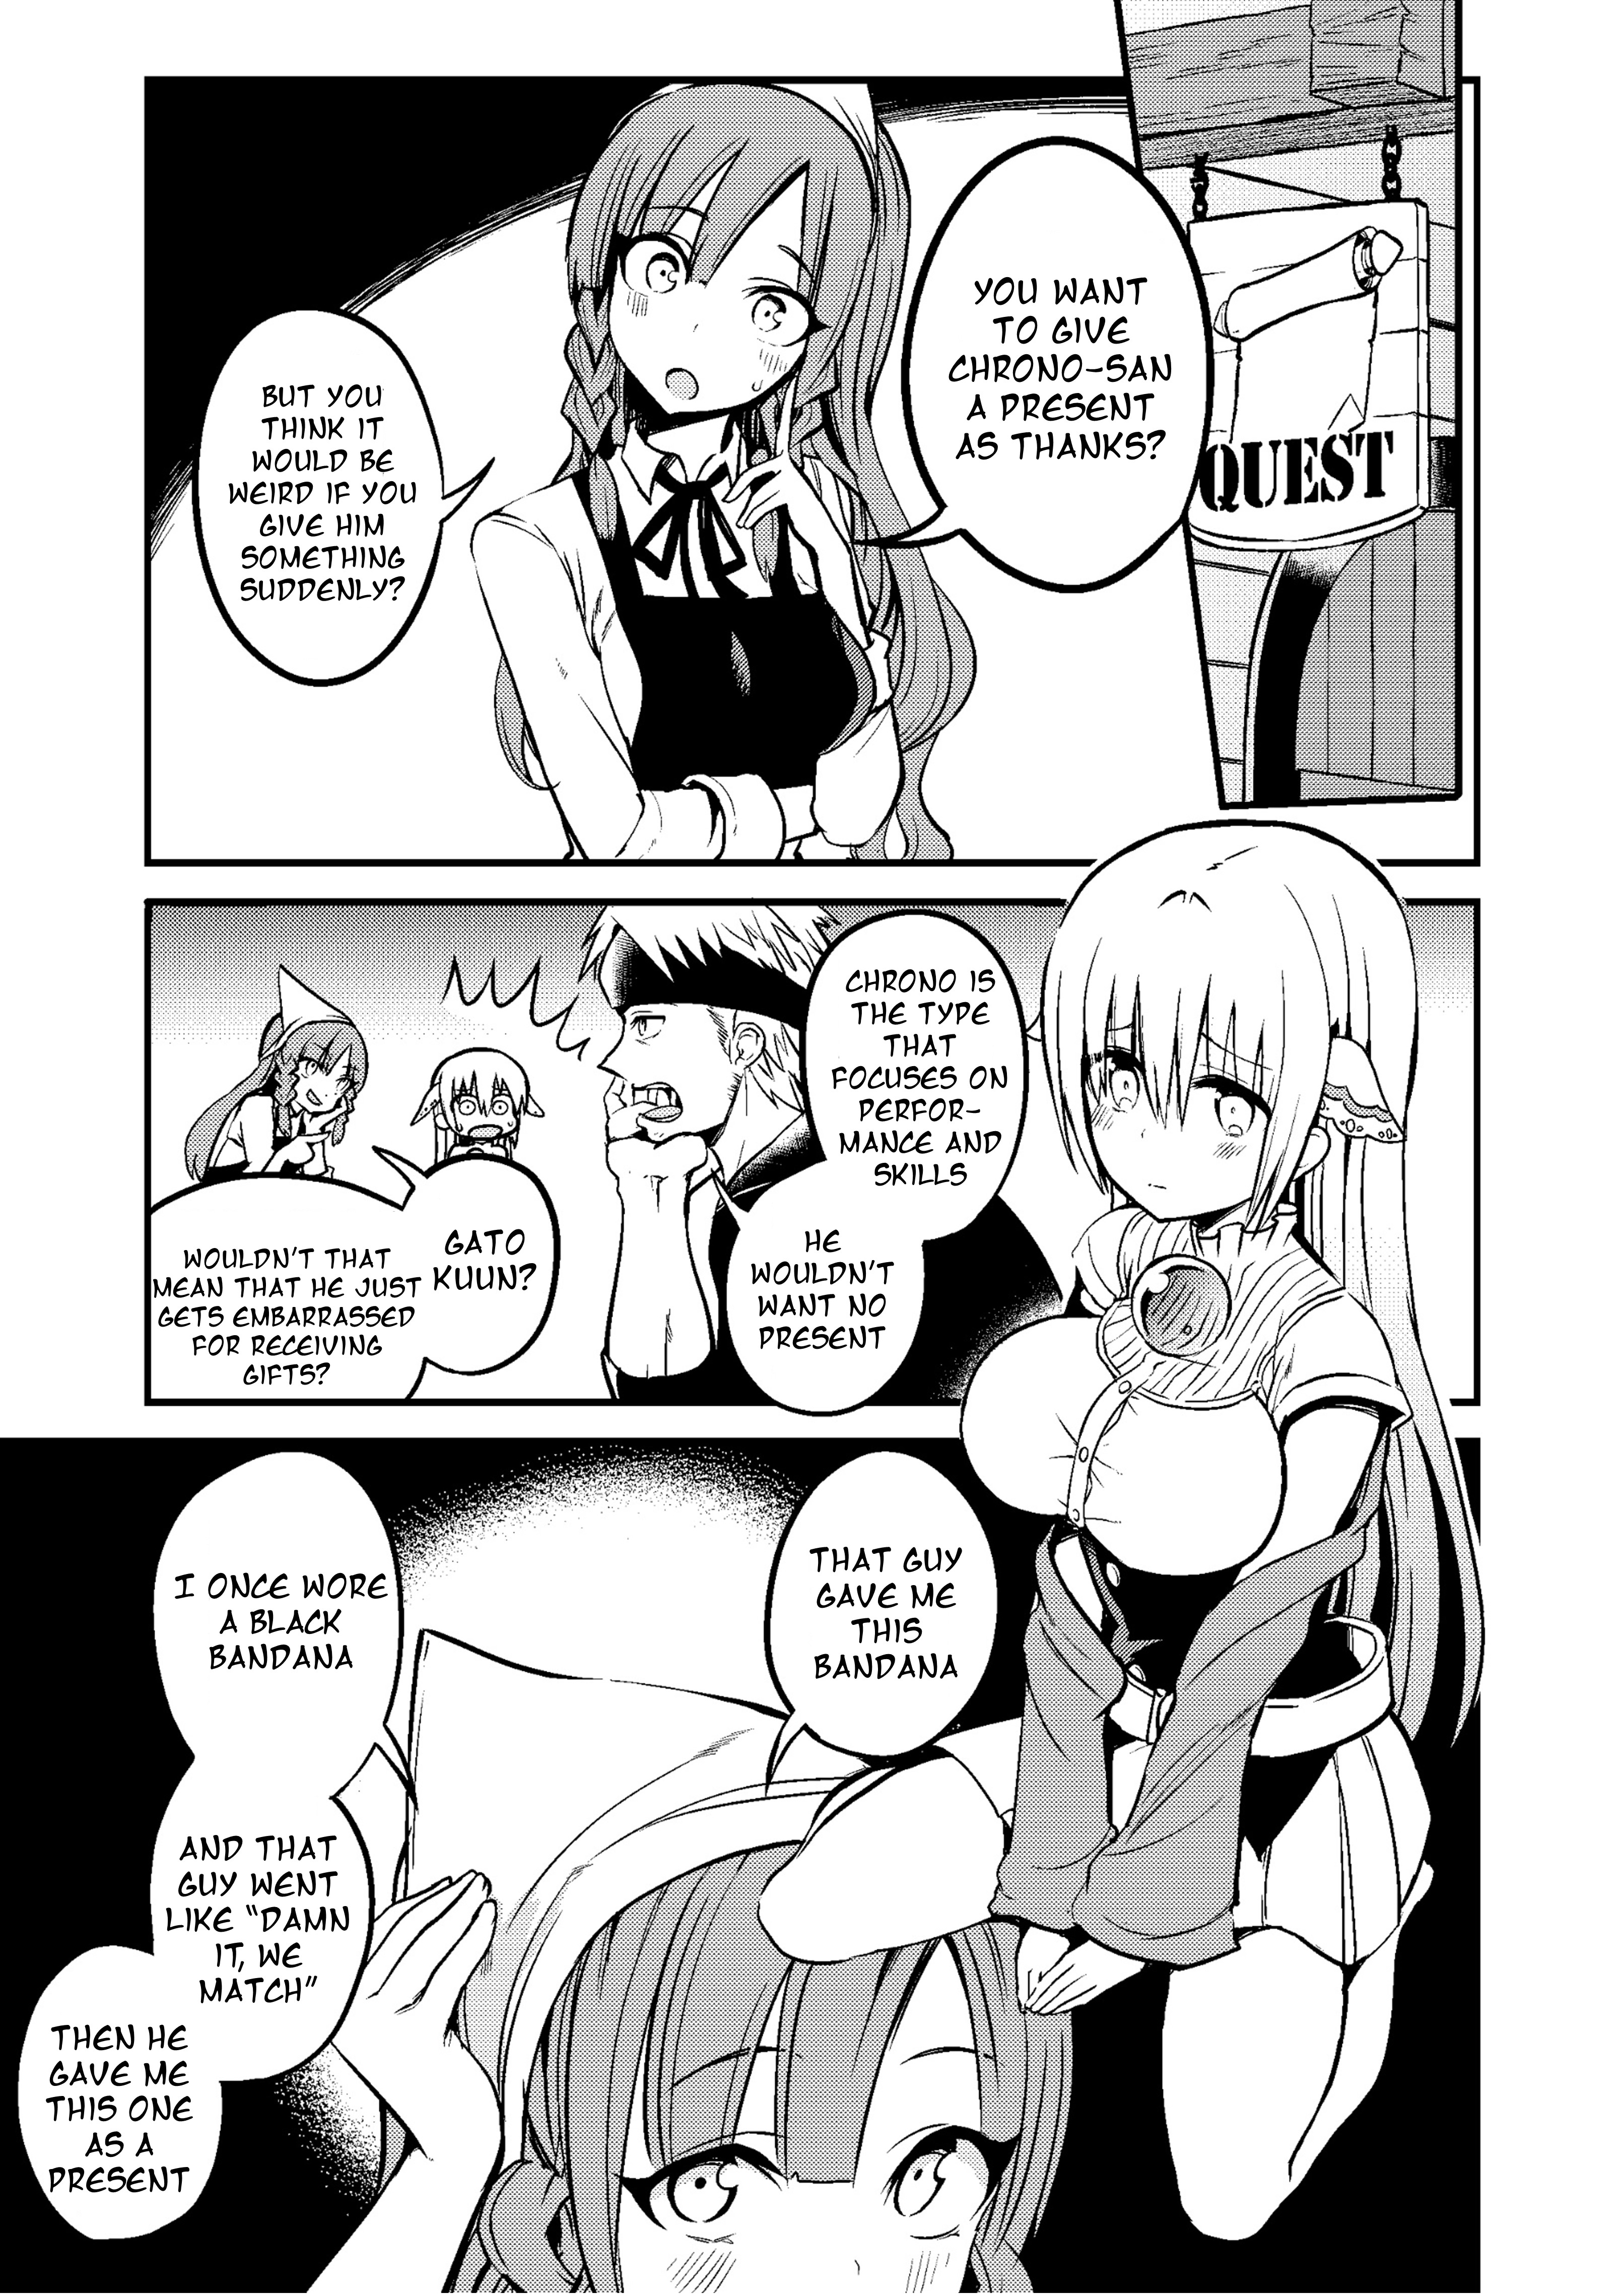 Shiro Madoushi Syrup-San Vol.1 Chapter 16: White Mage Syrup-San S Gift - Picture 1